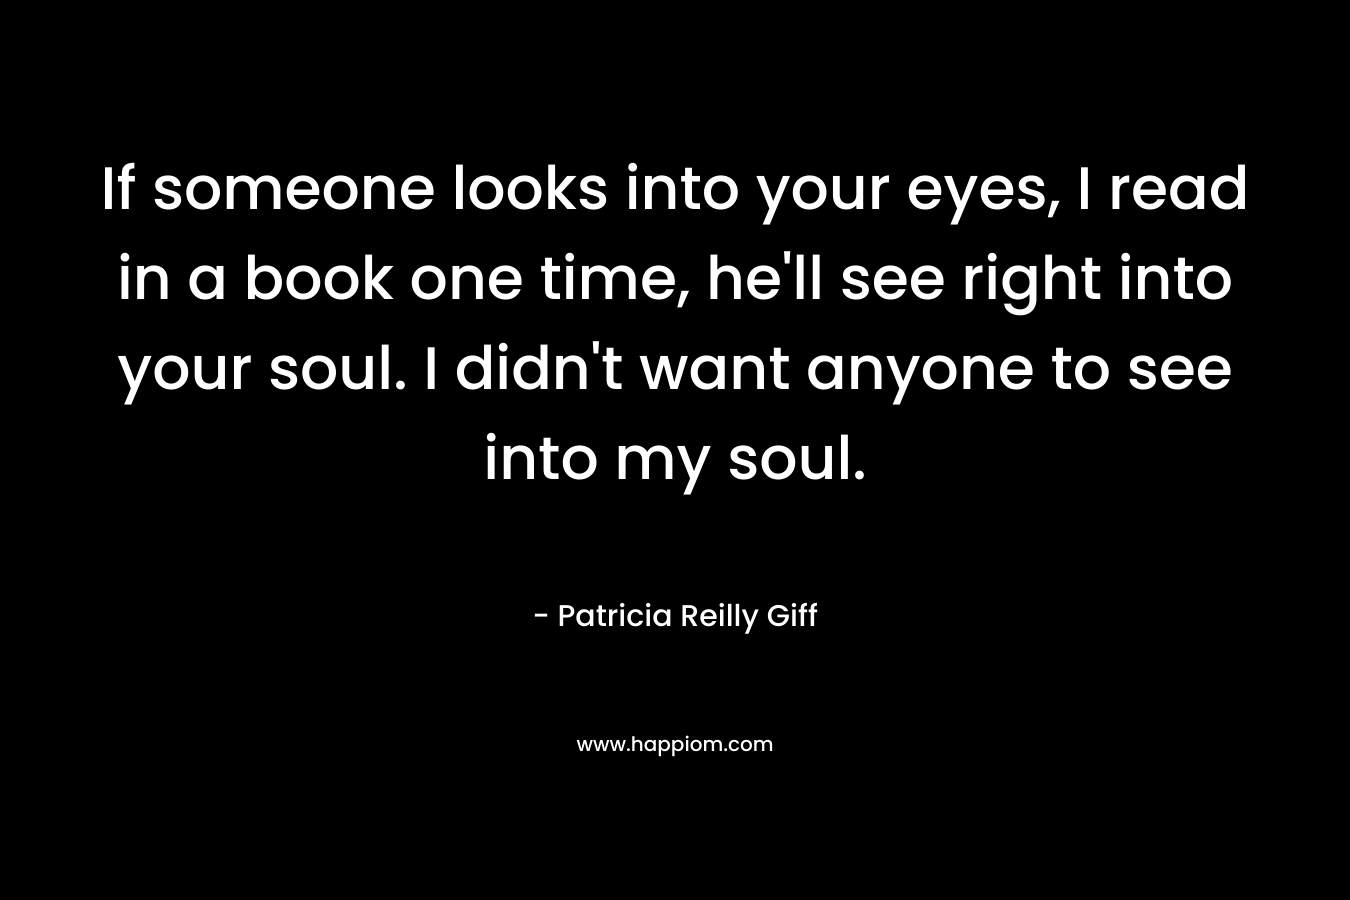 If someone looks into your eyes, I read in a book one time, he’ll see right into your soul. I didn’t want anyone to see into my soul. – Patricia Reilly Giff